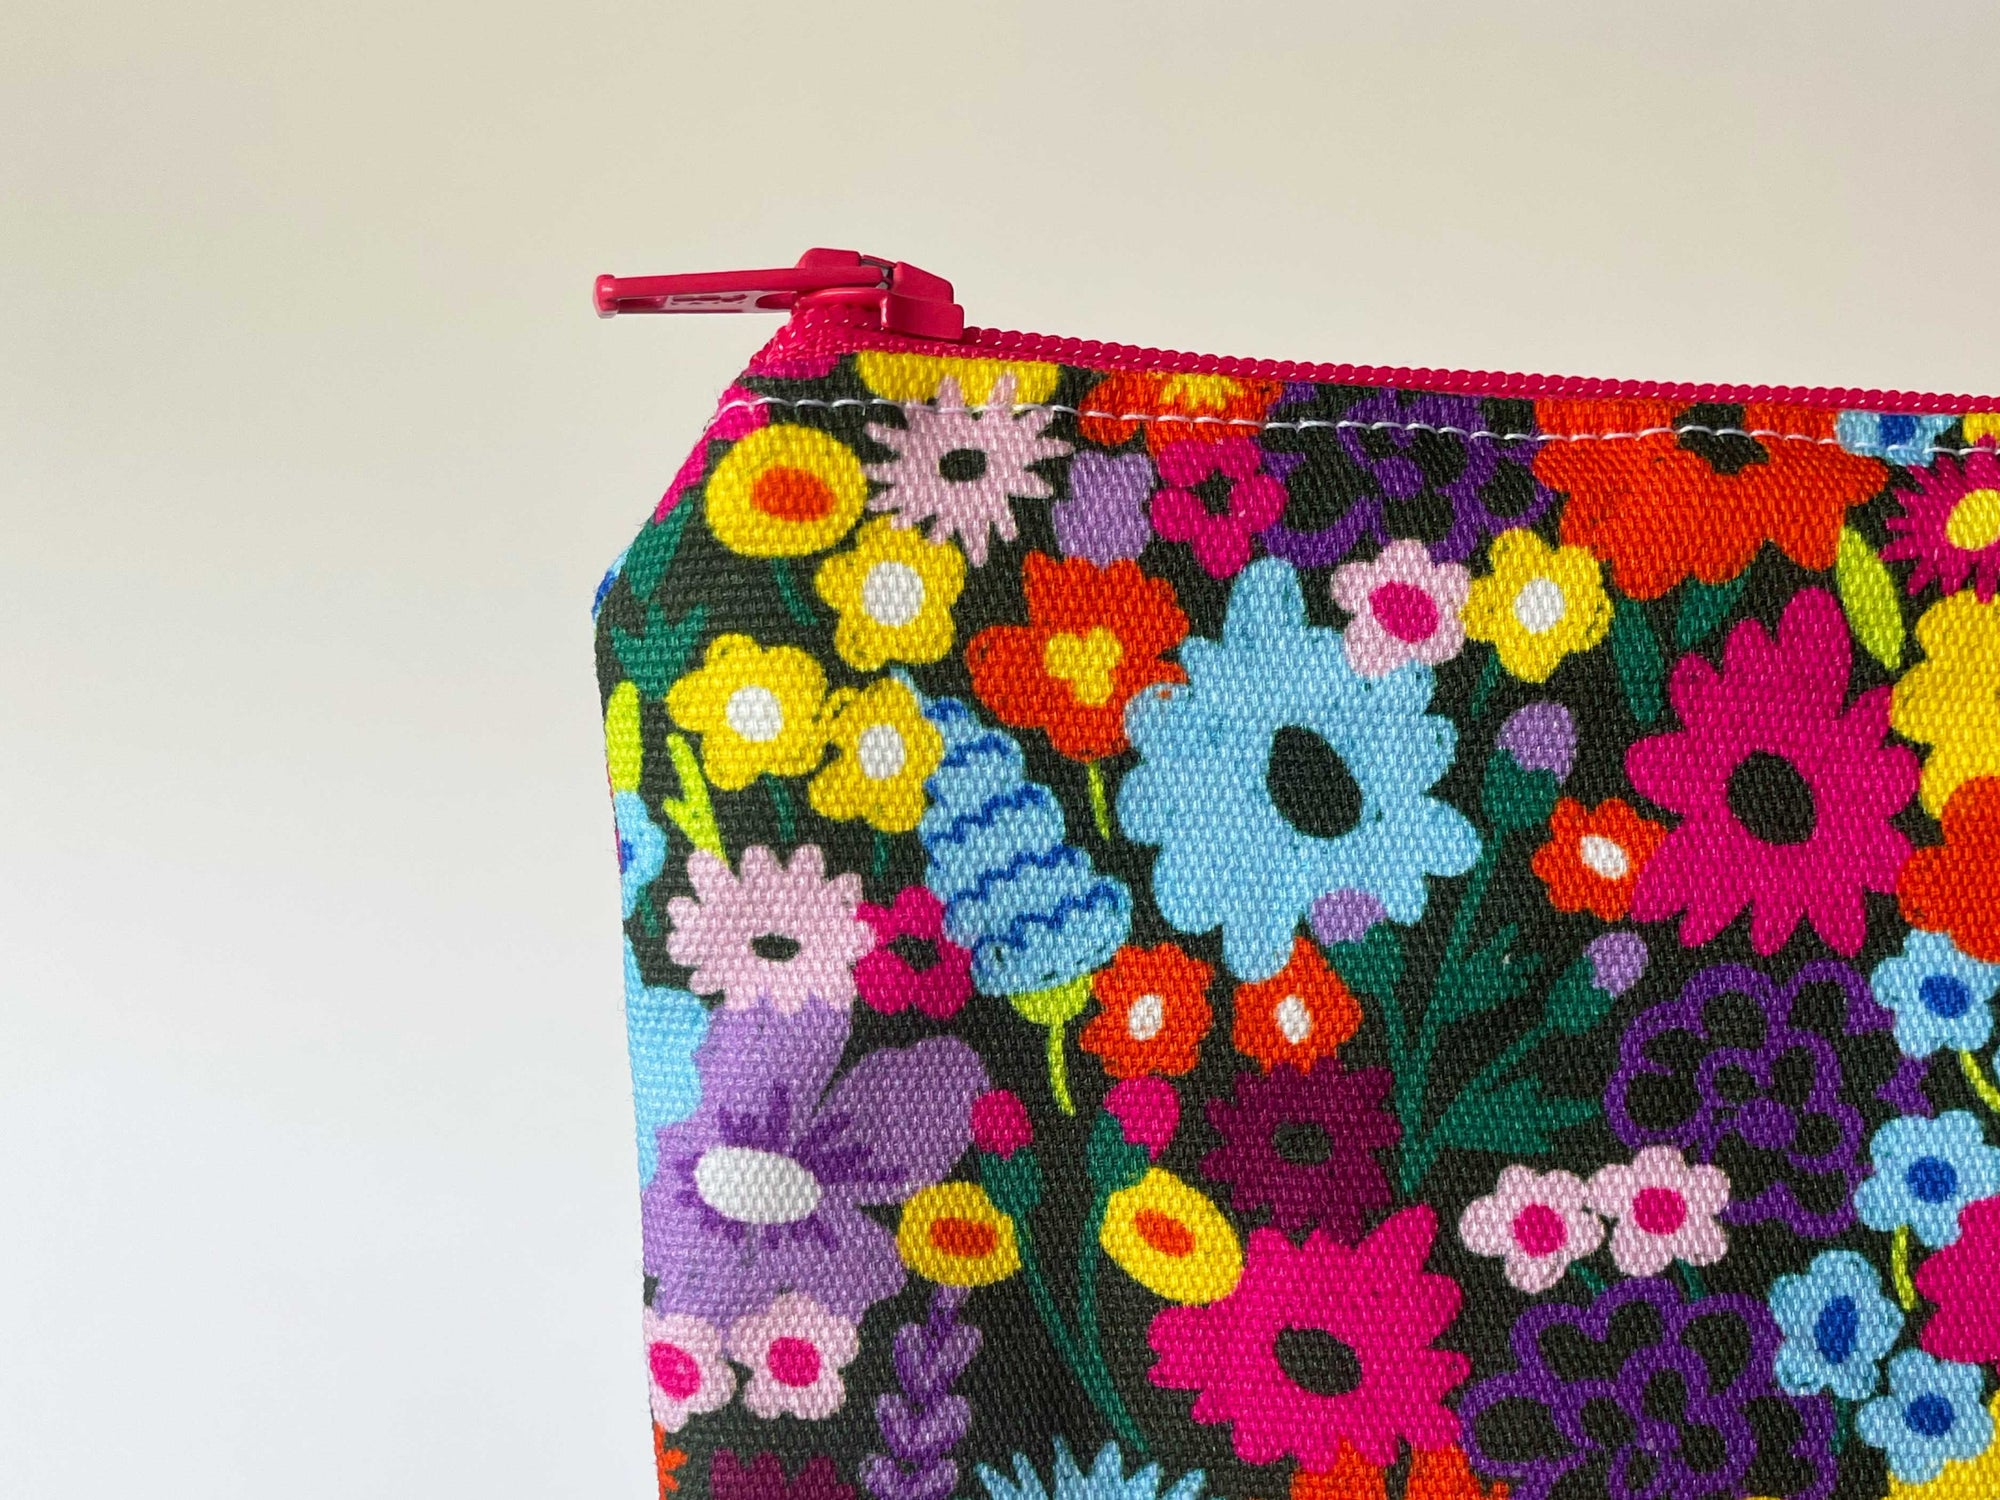 Large Zipper Pouch: Field of Florals